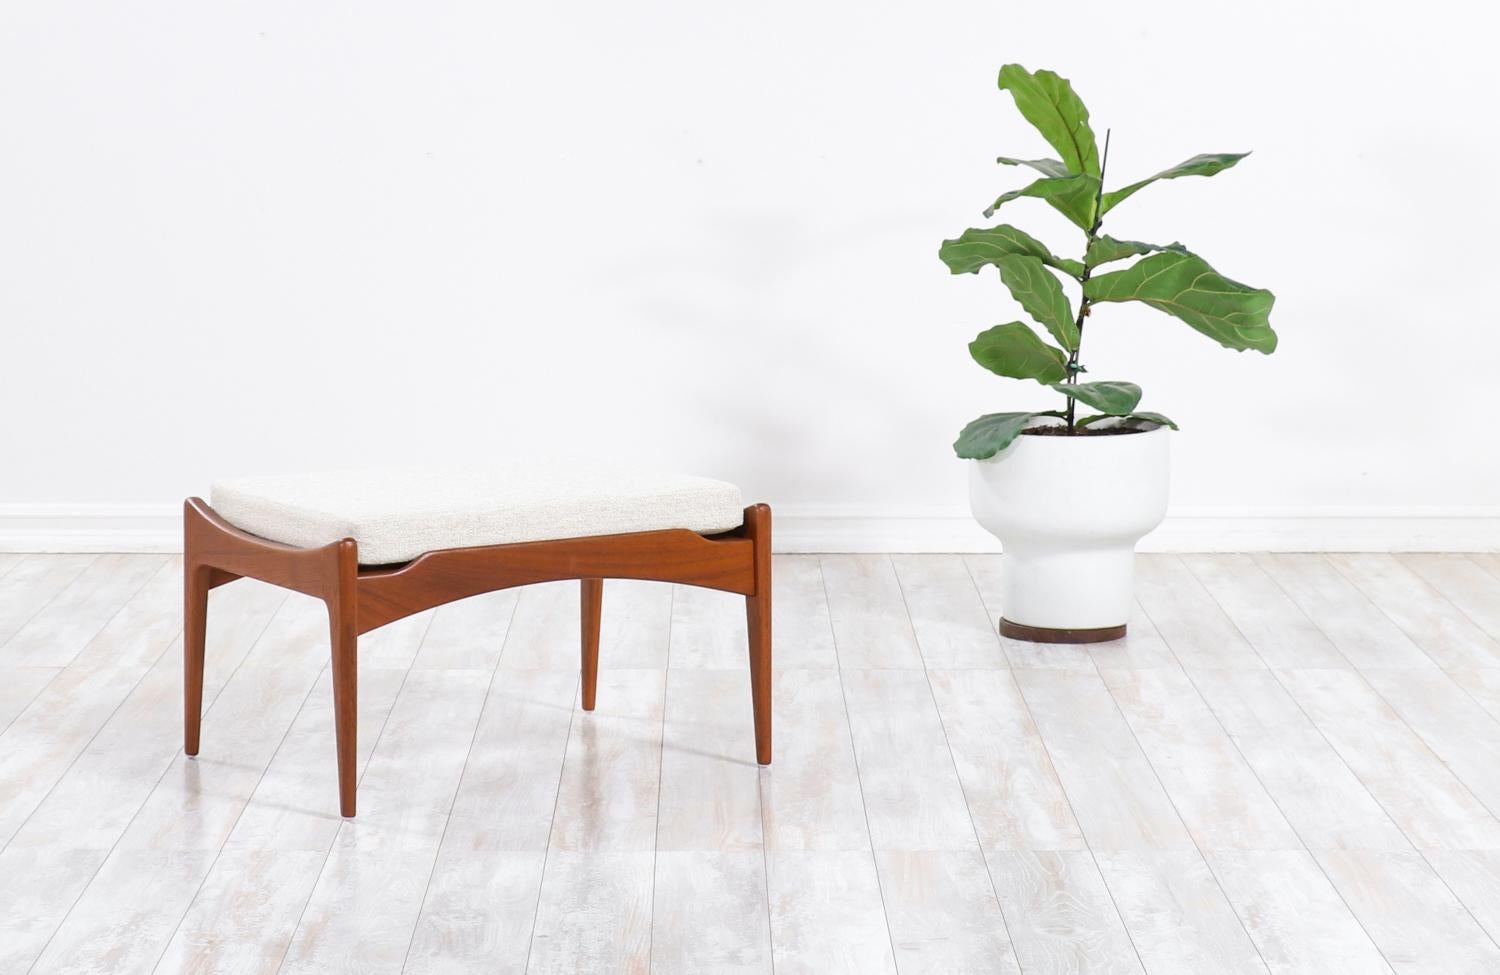 Classic sculptural stool designed by Poul Jensen, in collaboration with the Danish / American company Selig, in the 1960s. This beautifully designed modern stool features a sculpted teak frame that supports its comfortable new high-density foam